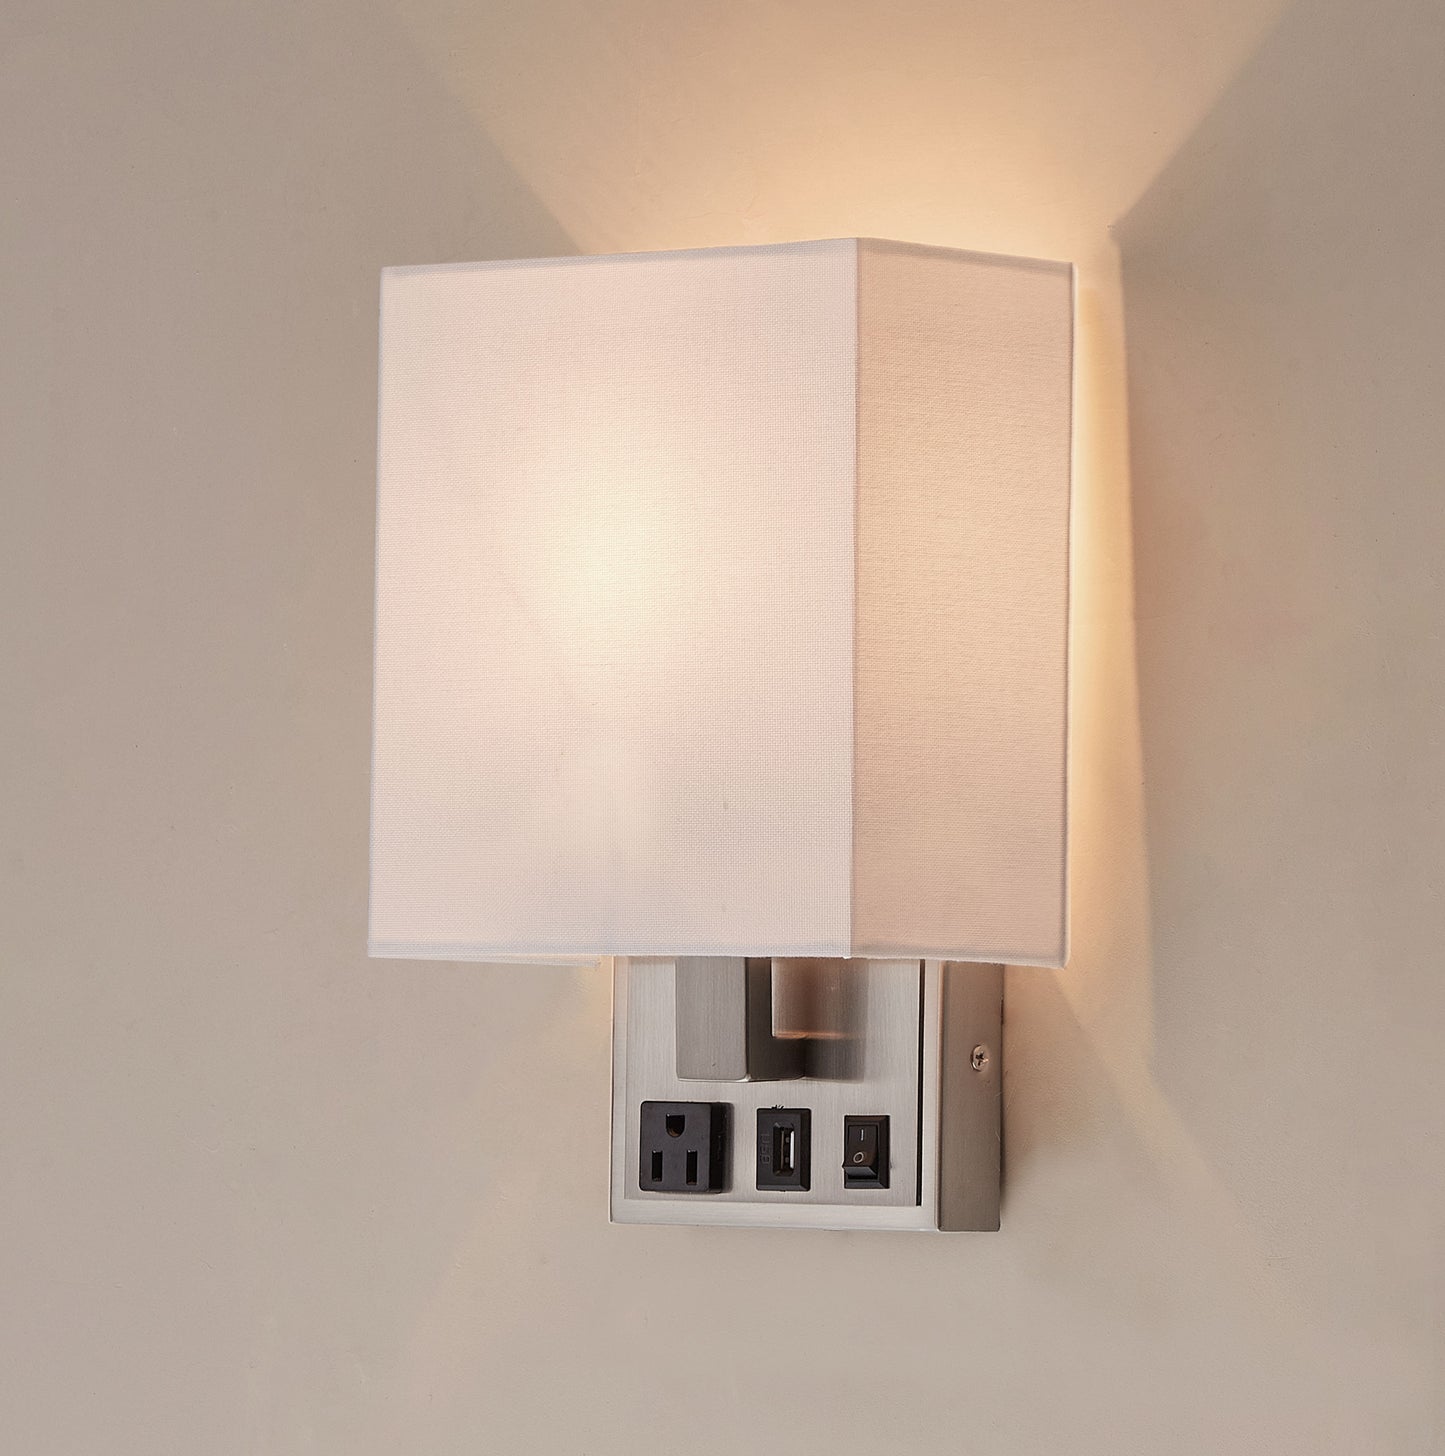 1-Light, Decorative Wall Sconces Light with 1 Switch, 1 USB, 1 Type C & 1 Outlet, Satin Nickel Finish w/ White shade, Wall Mounted Lamps for Home Hotel Corridor Restaurant